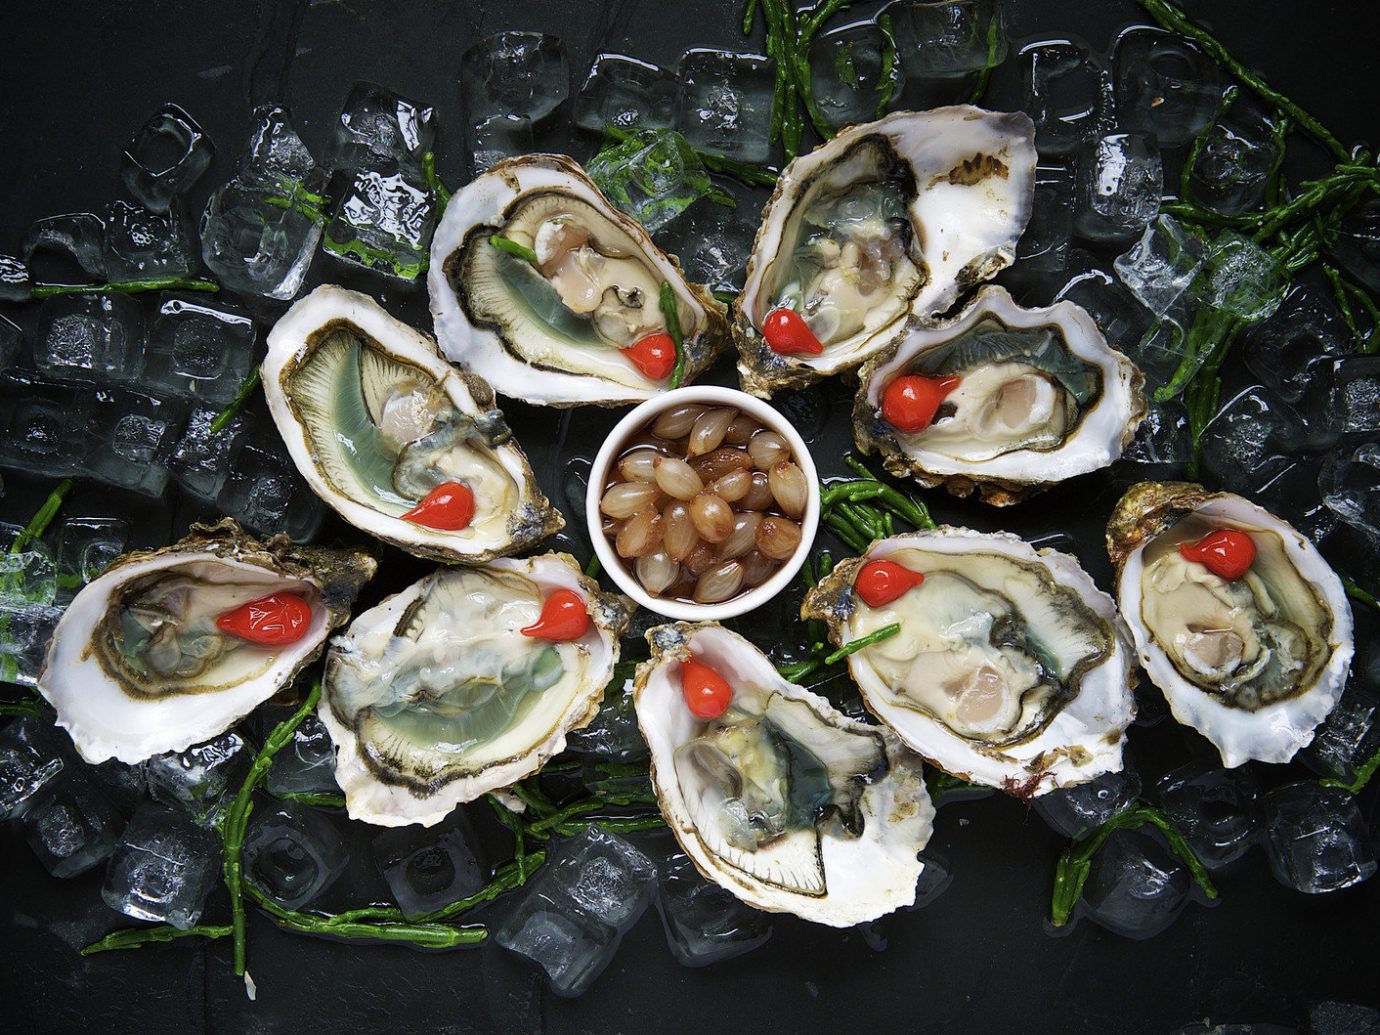 Budget food Seafood dish mussel invertebrate clams oysters mussels and scallops oyster cuisine flower meal variety several